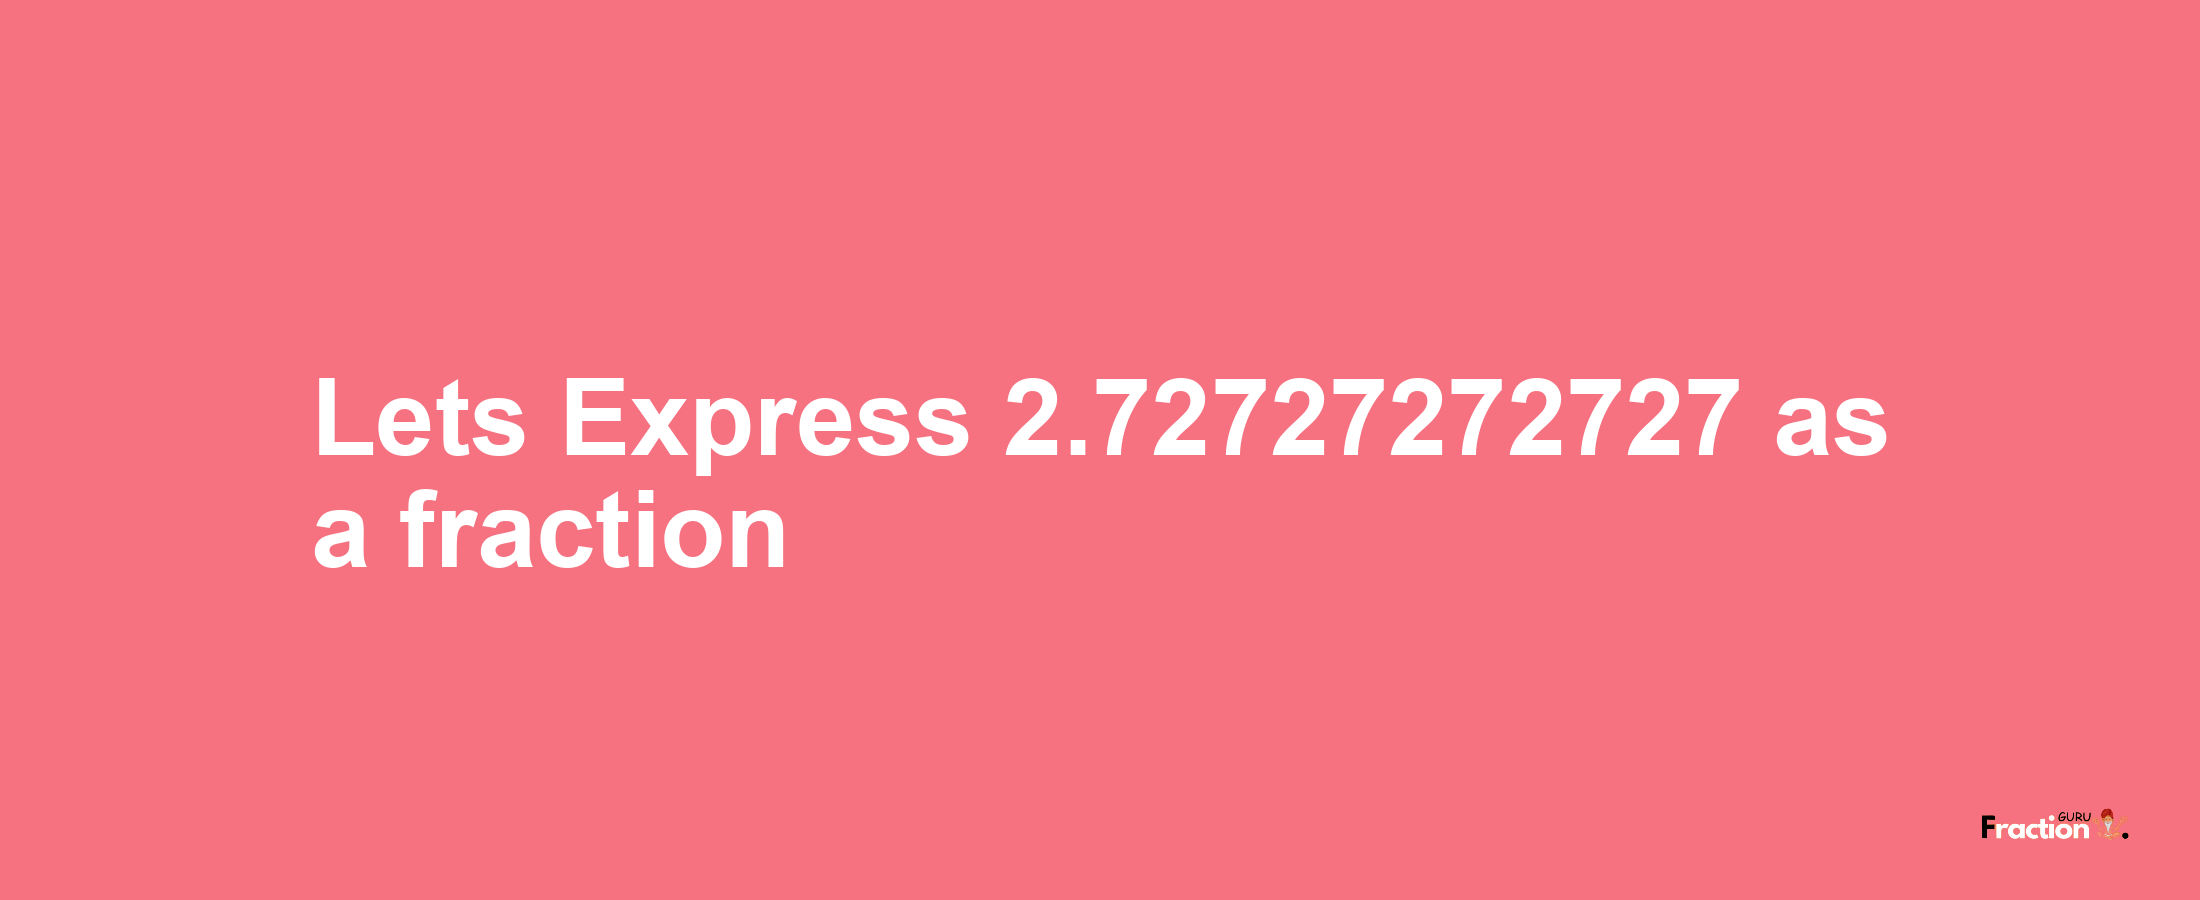 Lets Express 2.72727272727 as afraction